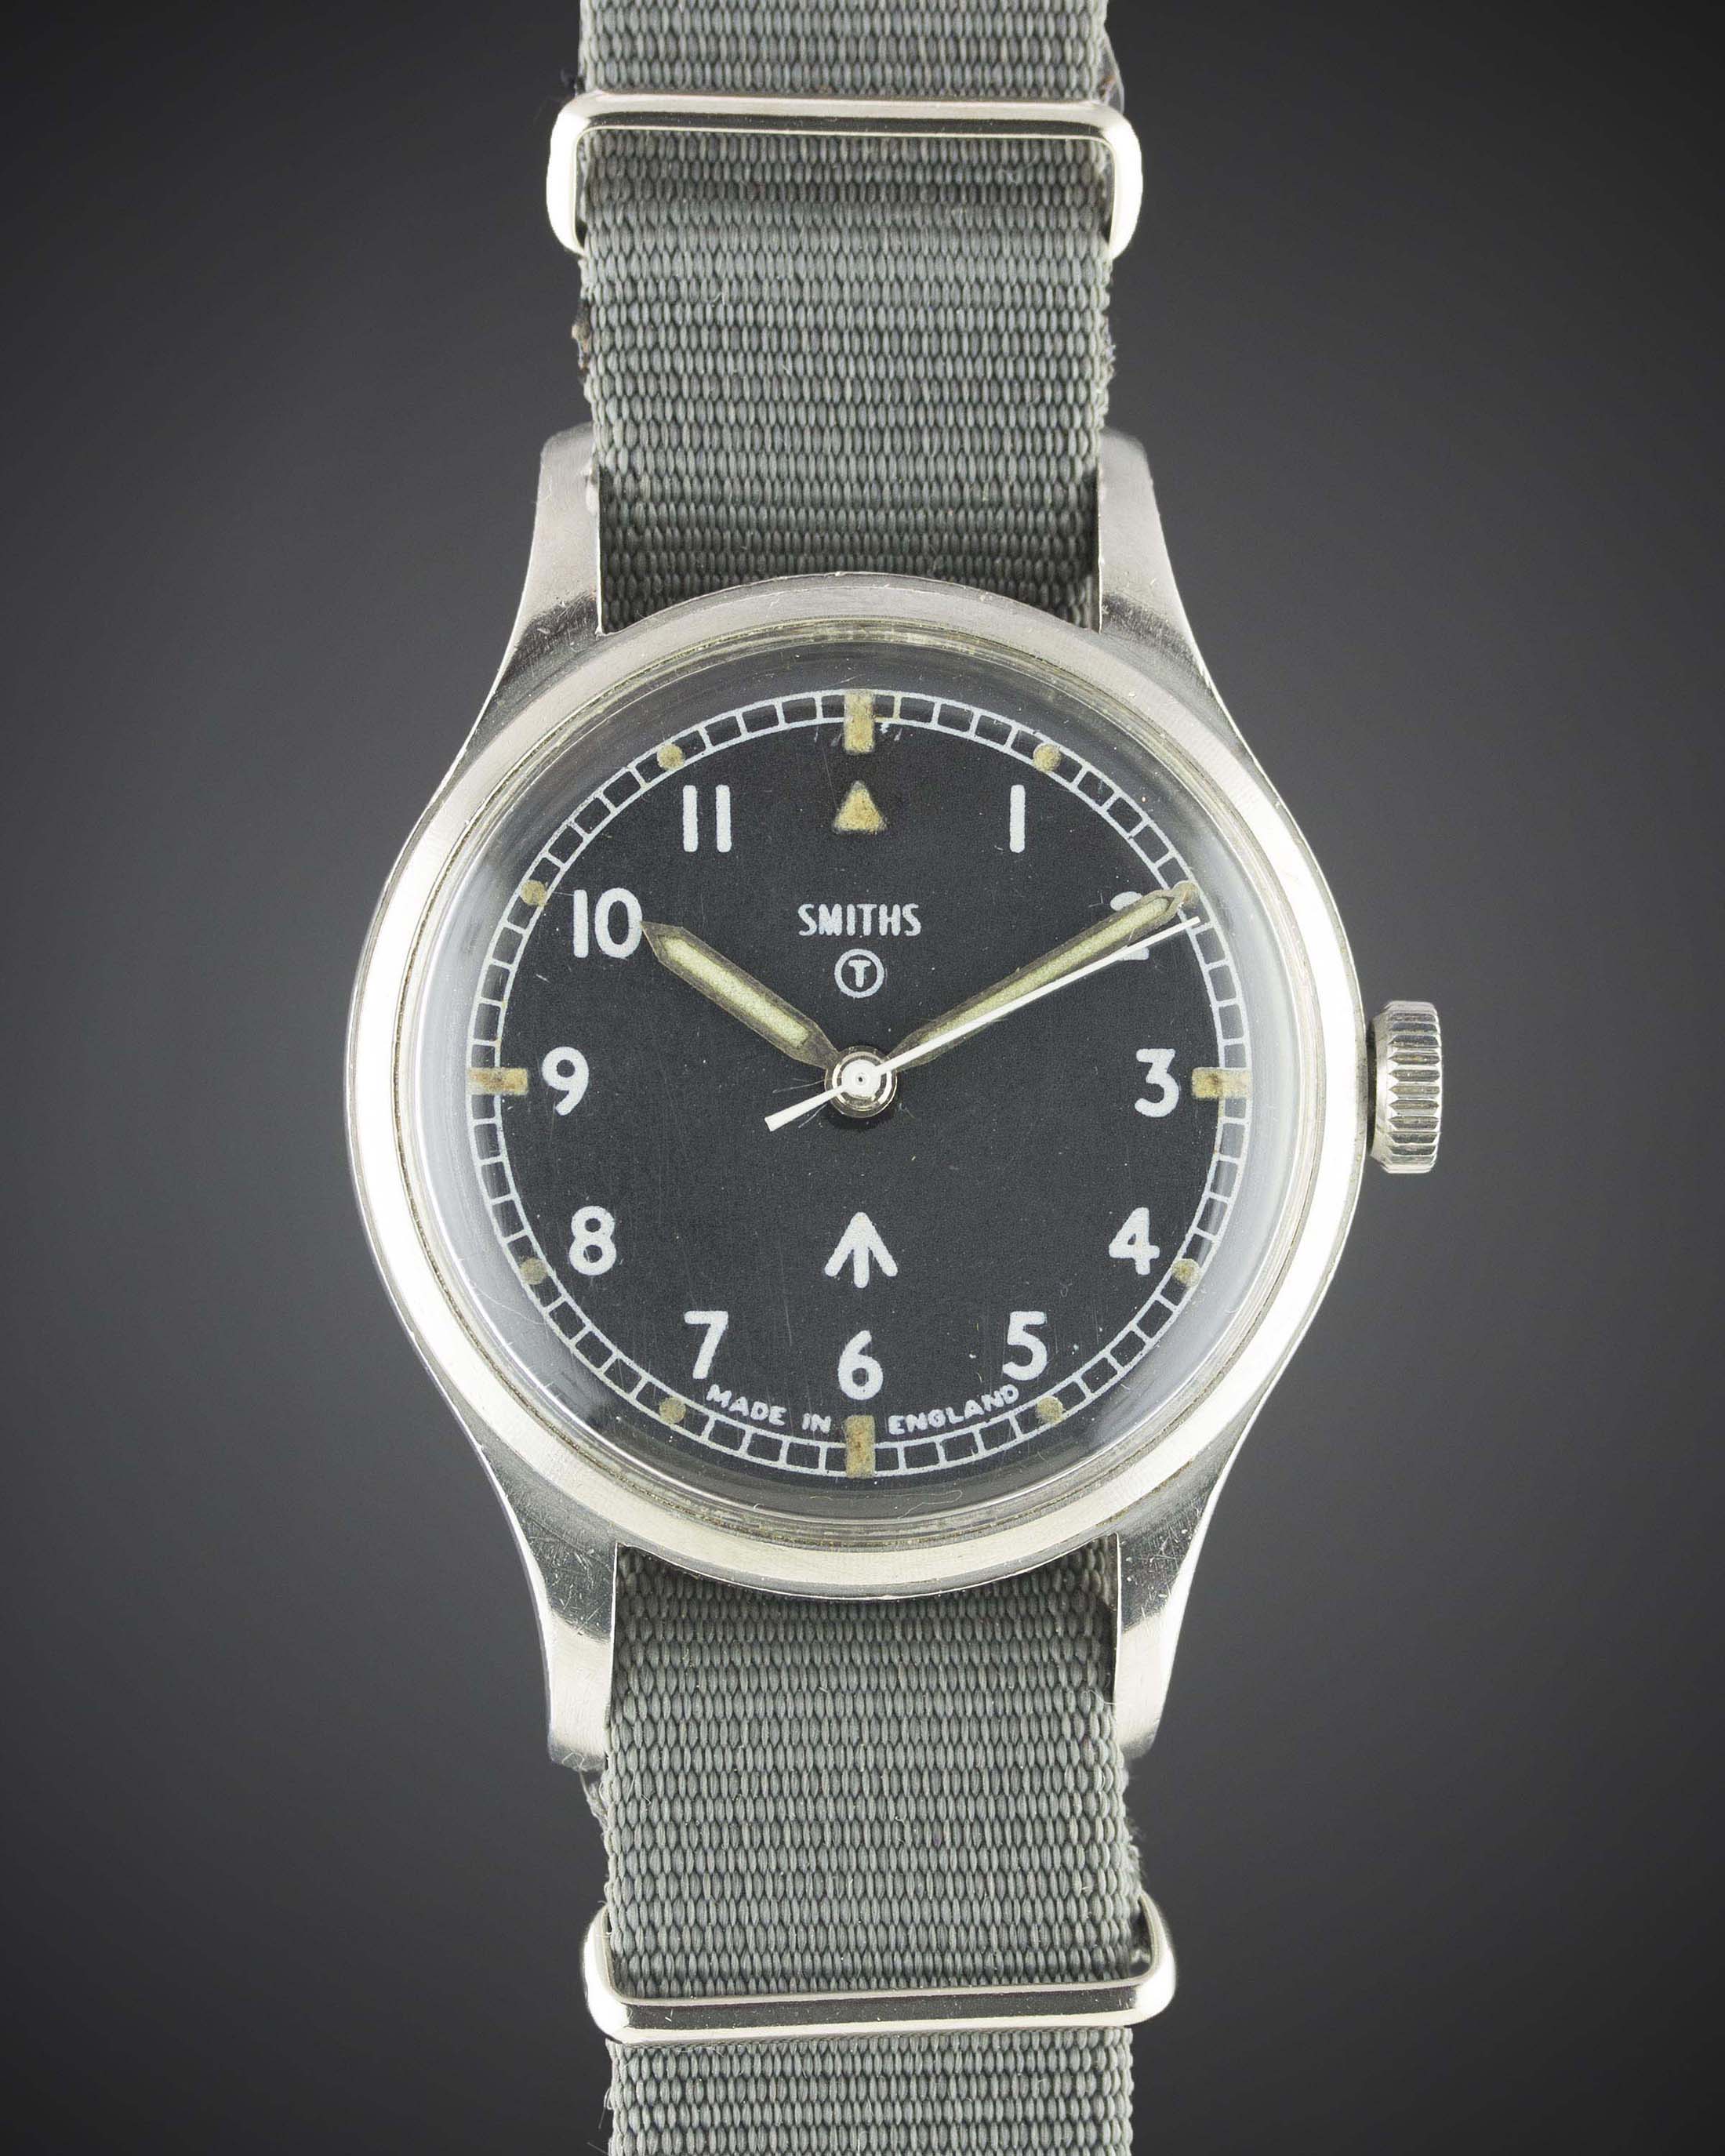 A GENTLEMAN'S STAINLESS STEEL BRITISH MILITARY SMITHS WRIST WATCH DATED 1968 Movement: 17J, manual